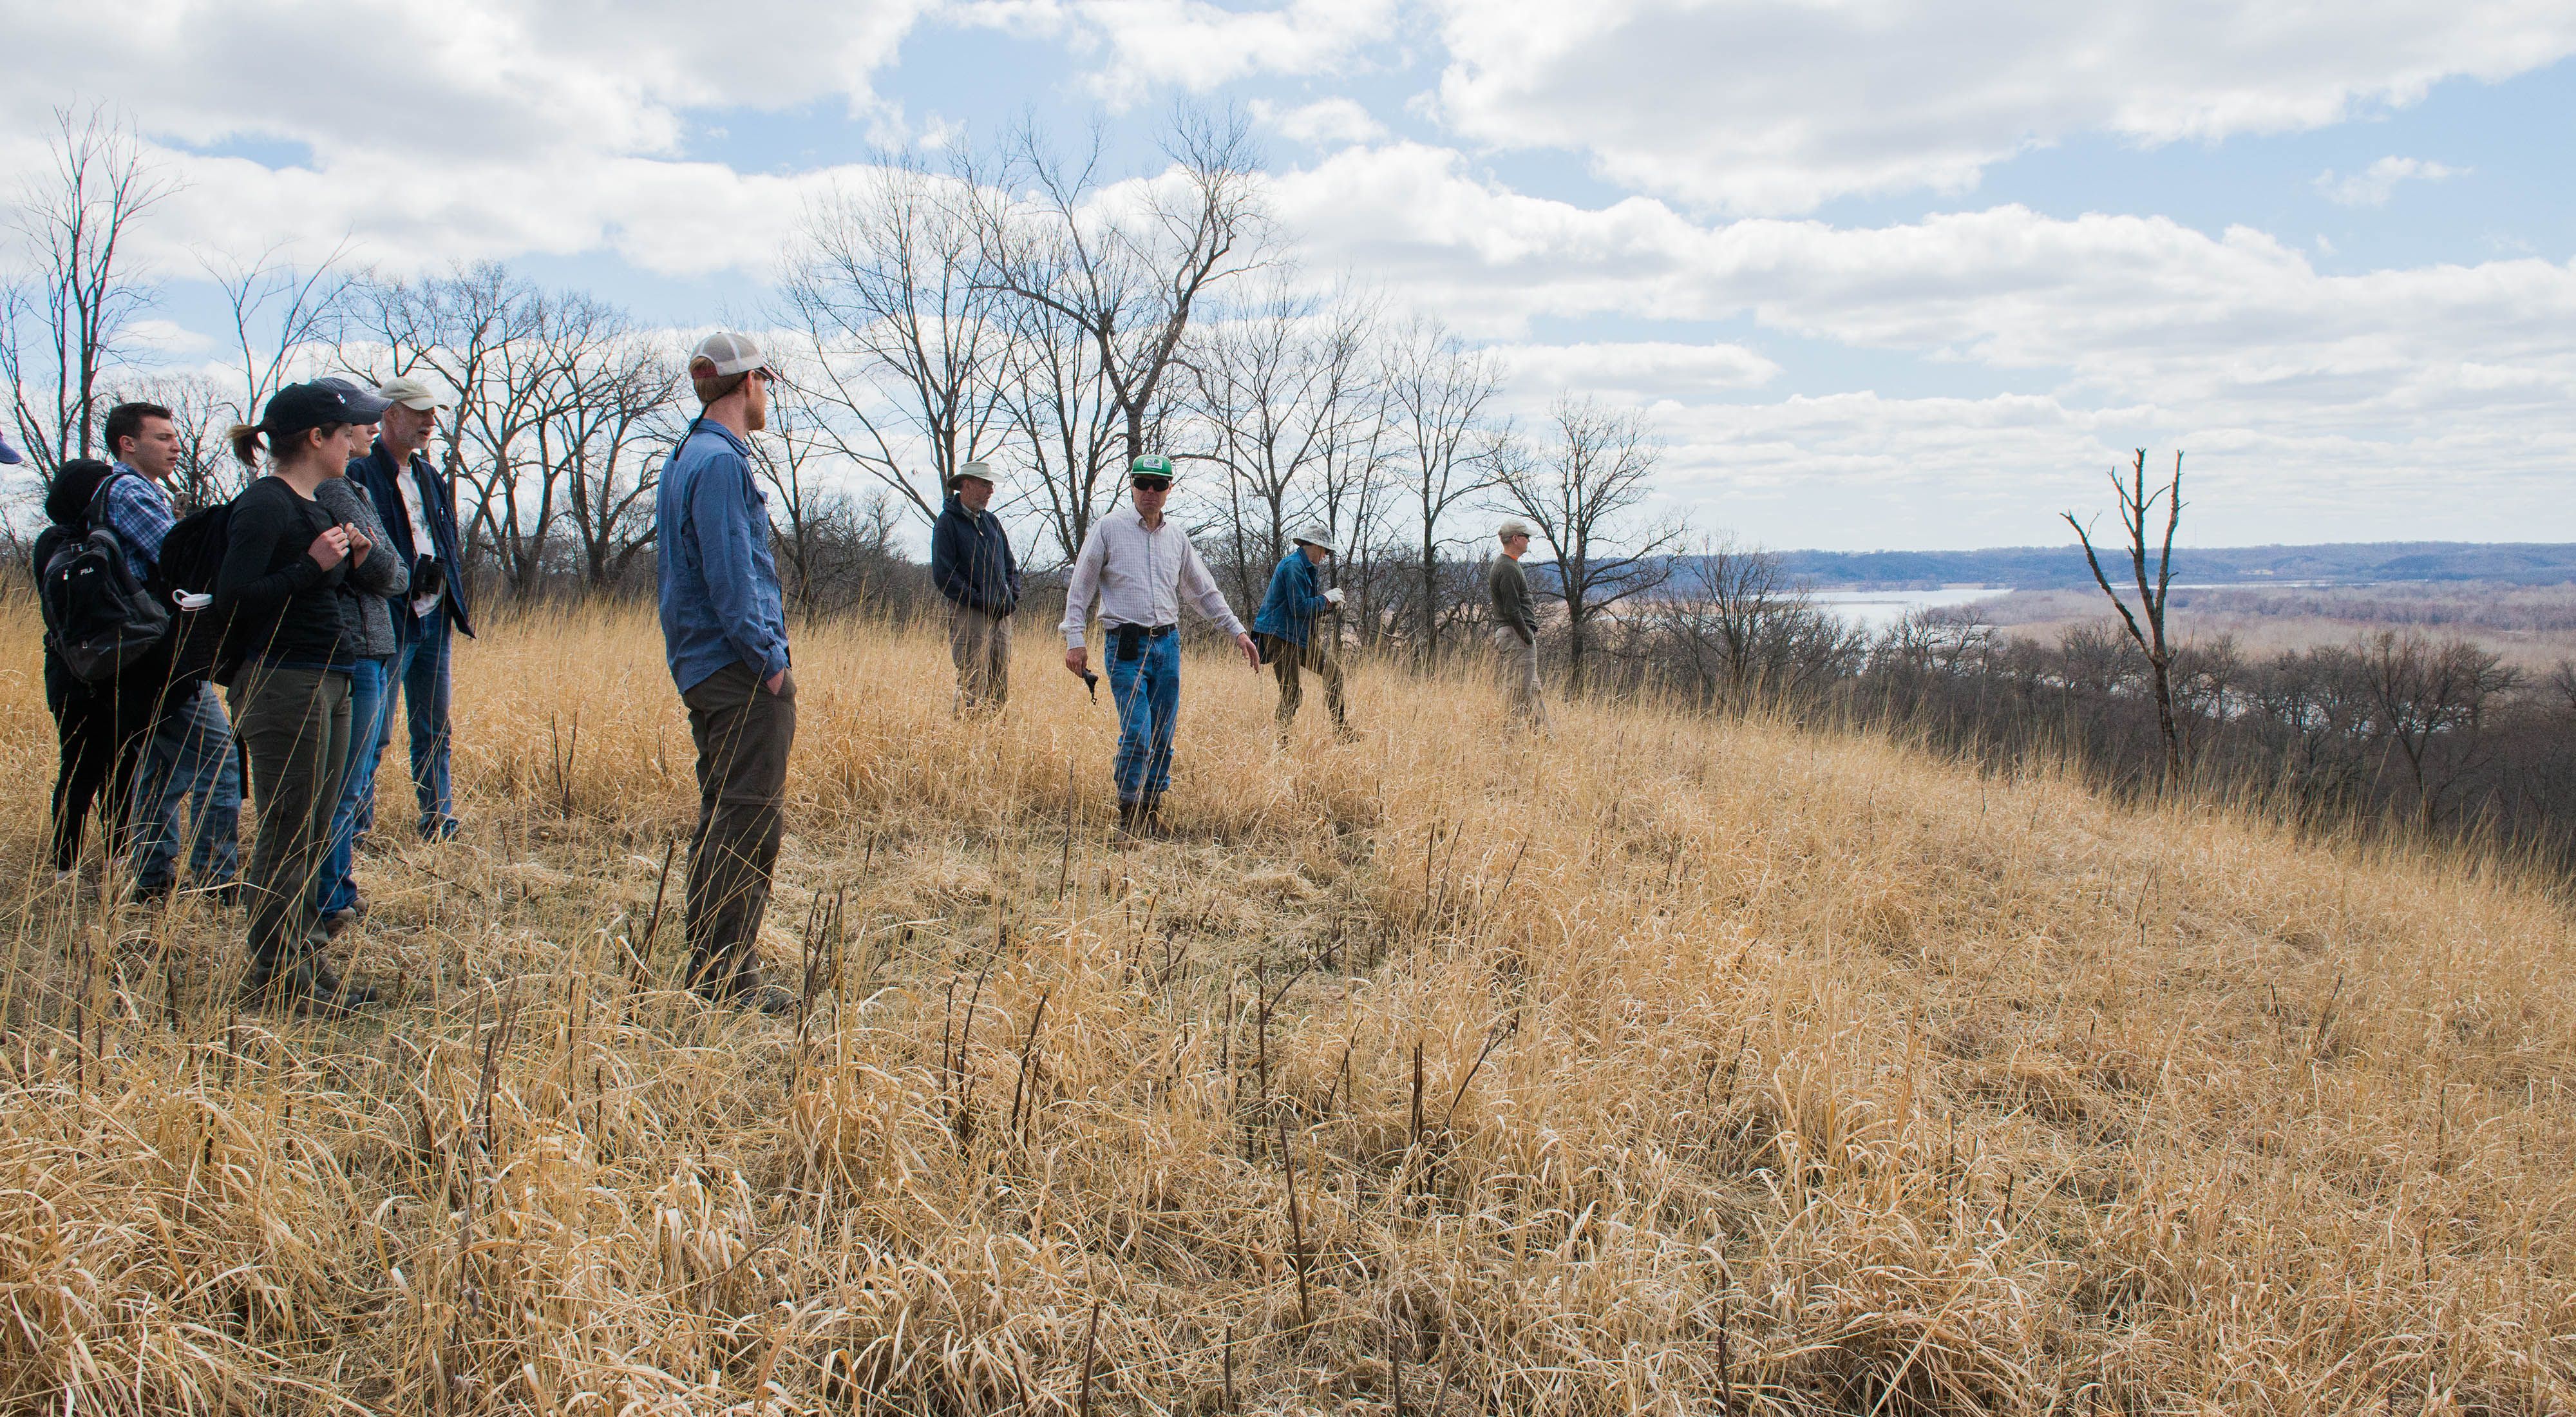 A group of people stand on a blufftop covered in golden grasses and look out toward a river.